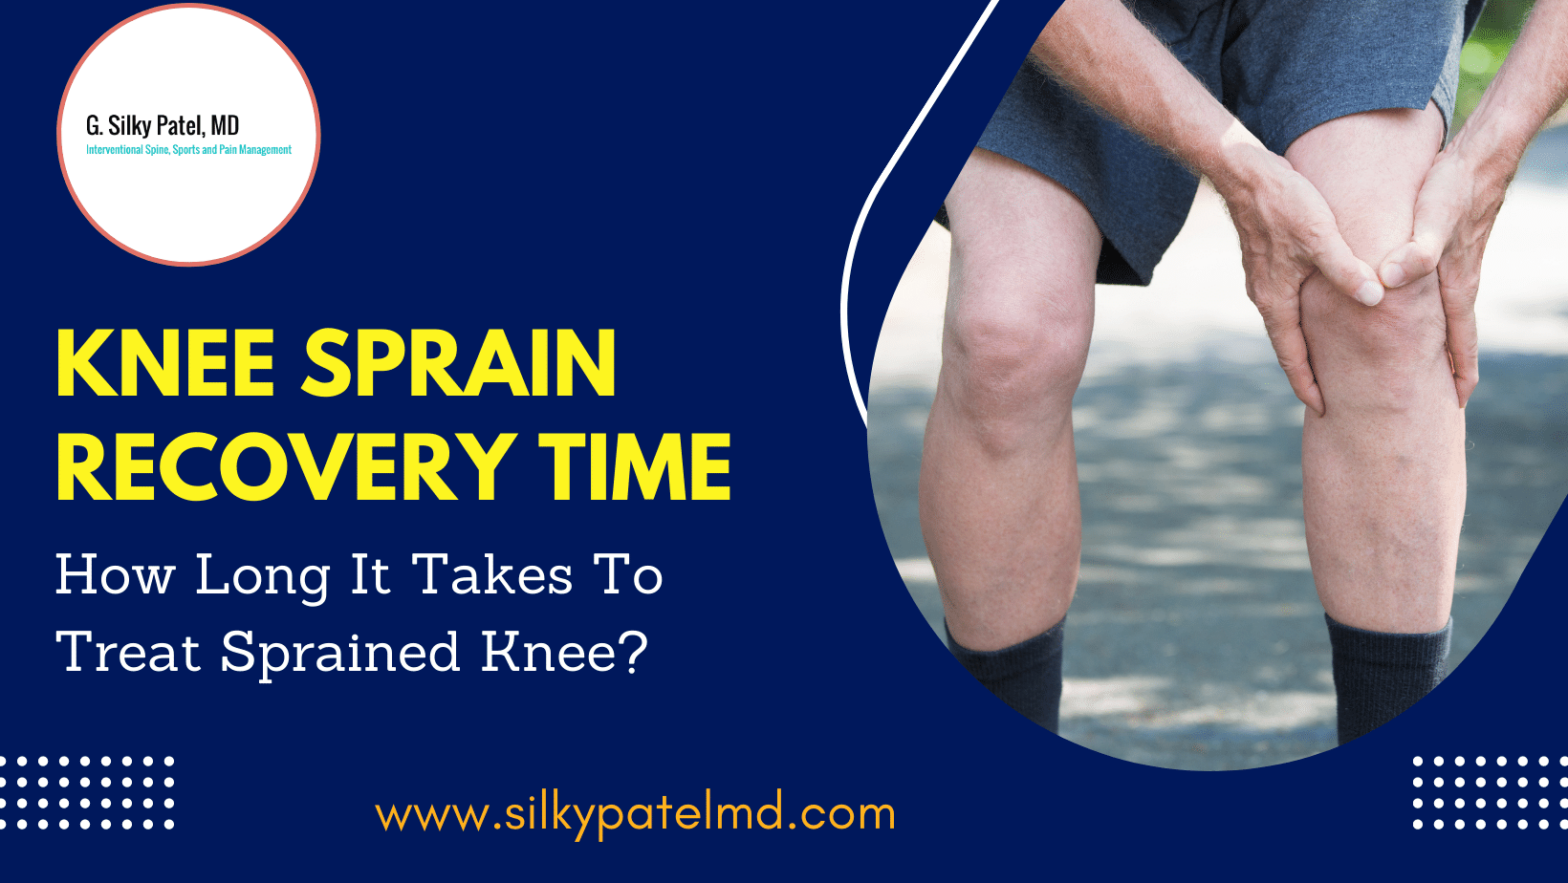 Sprained Knee - Knee Sprain Recovery Time_How Long It Takes To Treat - Silky Patel MD